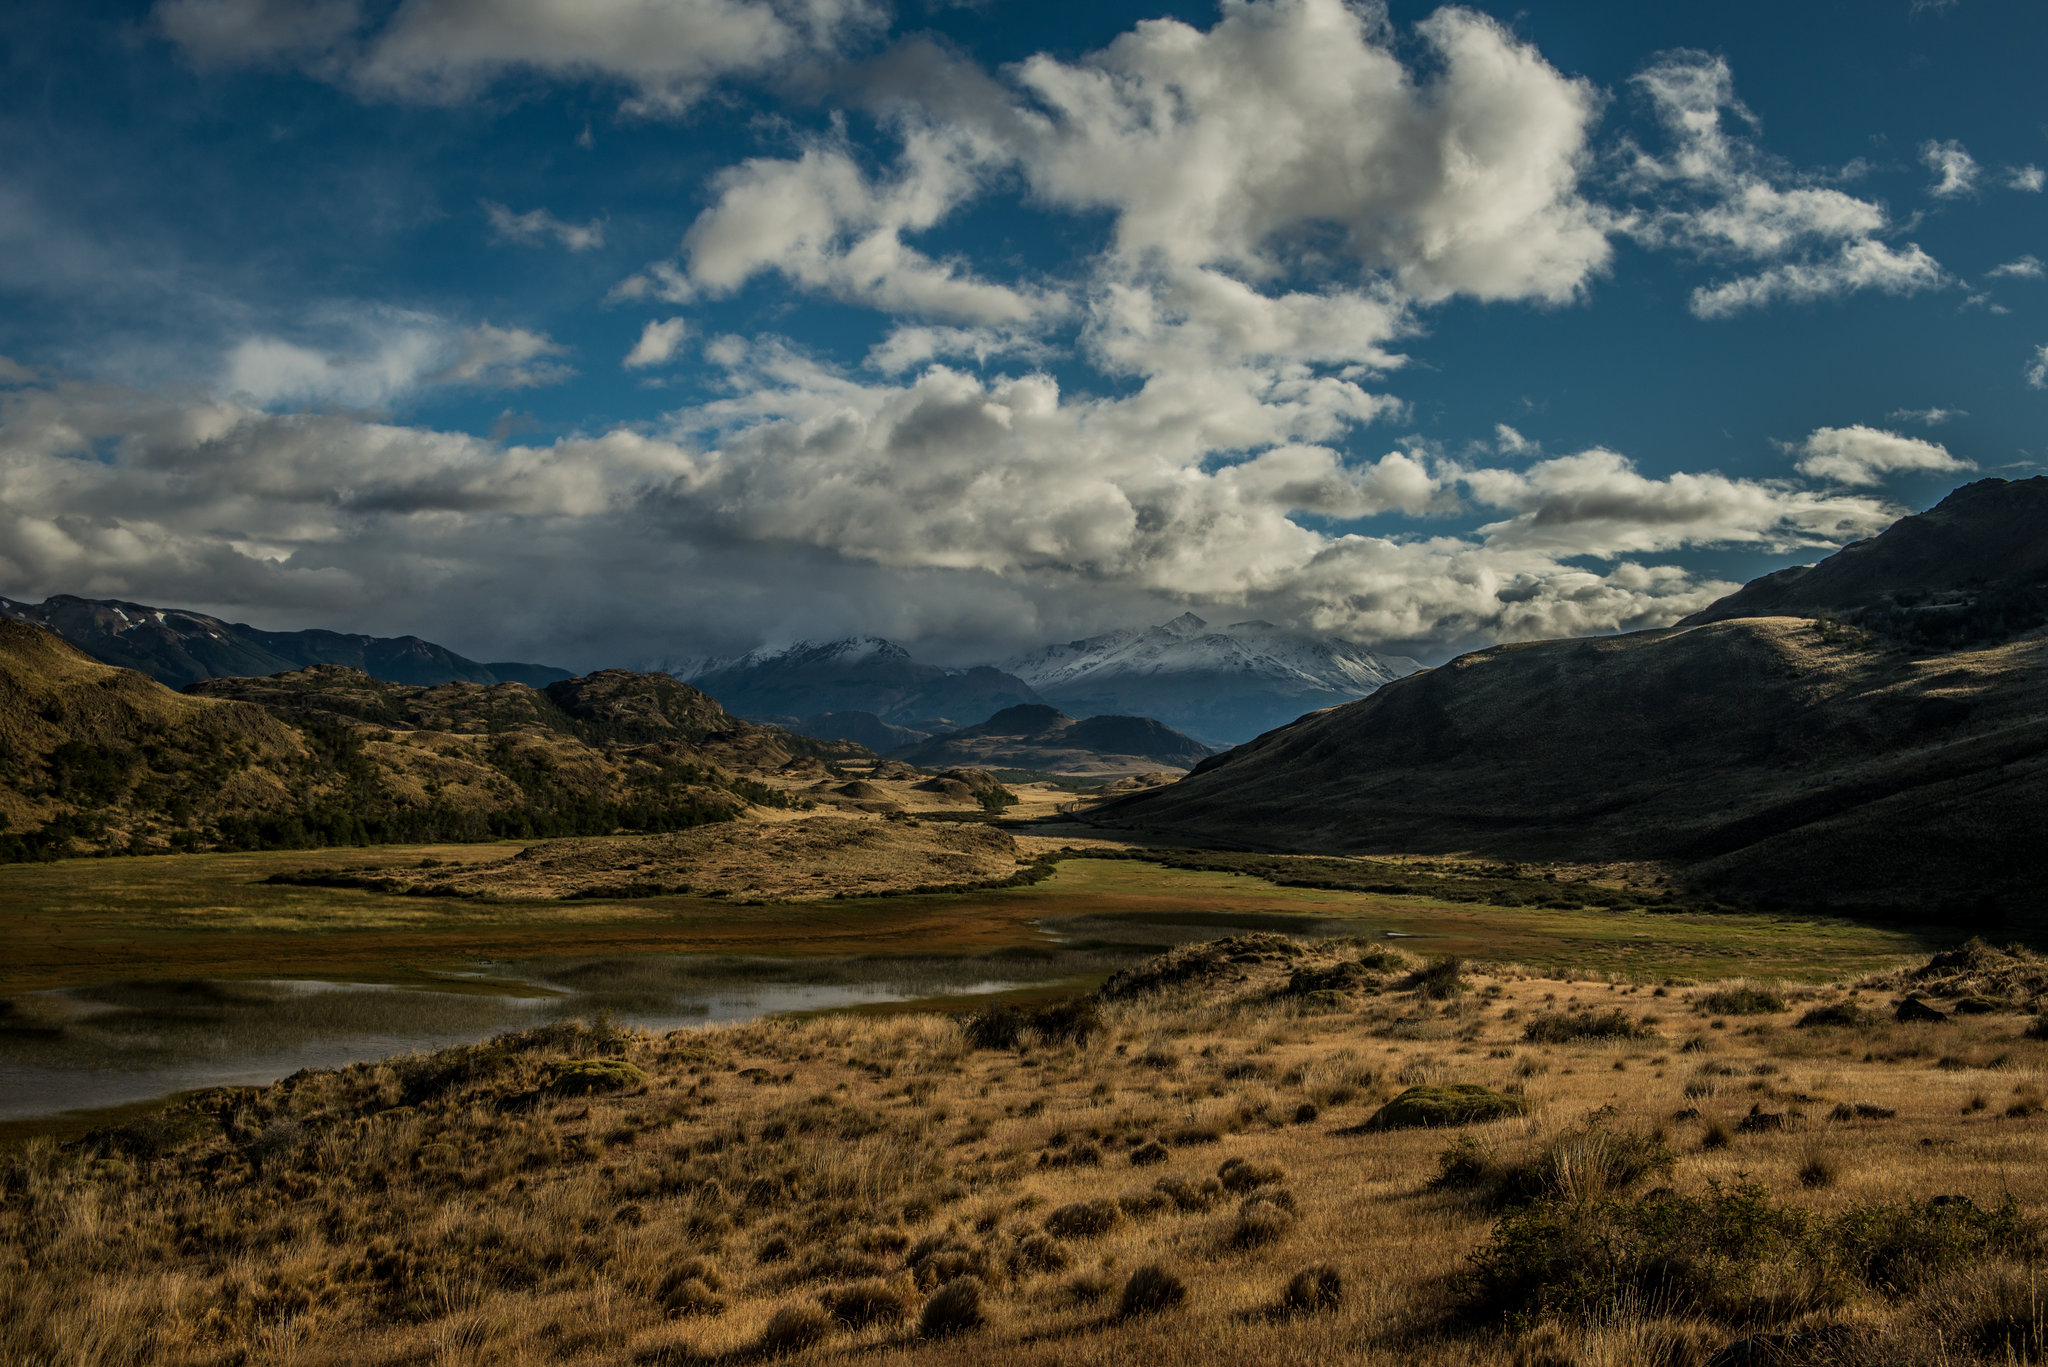 With 10 Million Acres in Patagonia, a National Park System Is Born ...